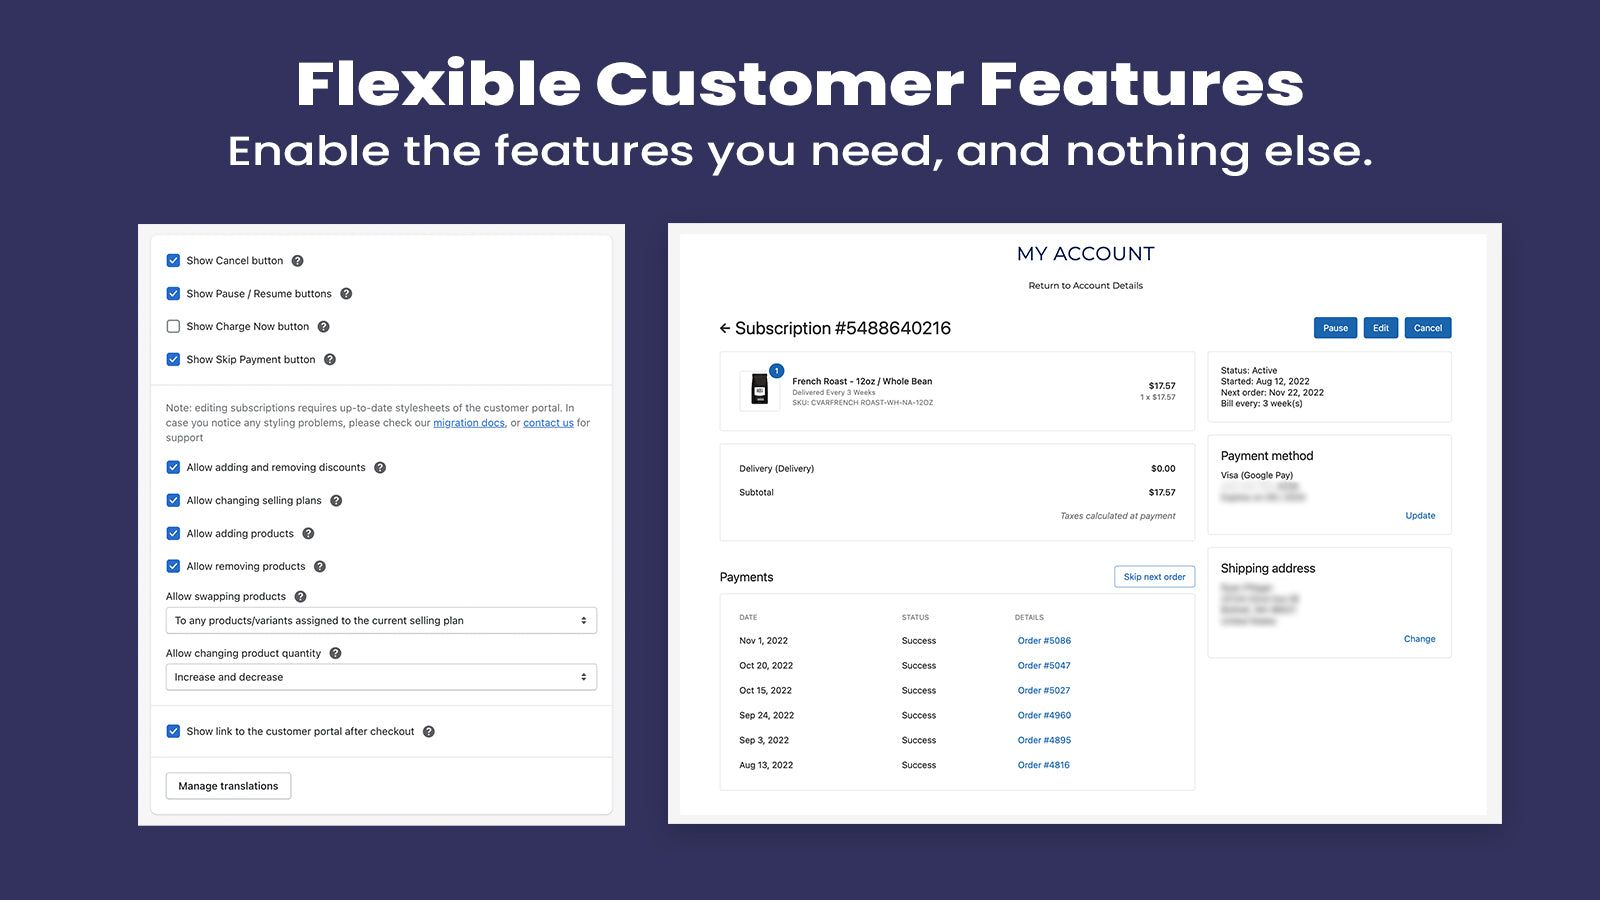 Allow customers to manage their own subscriptions.